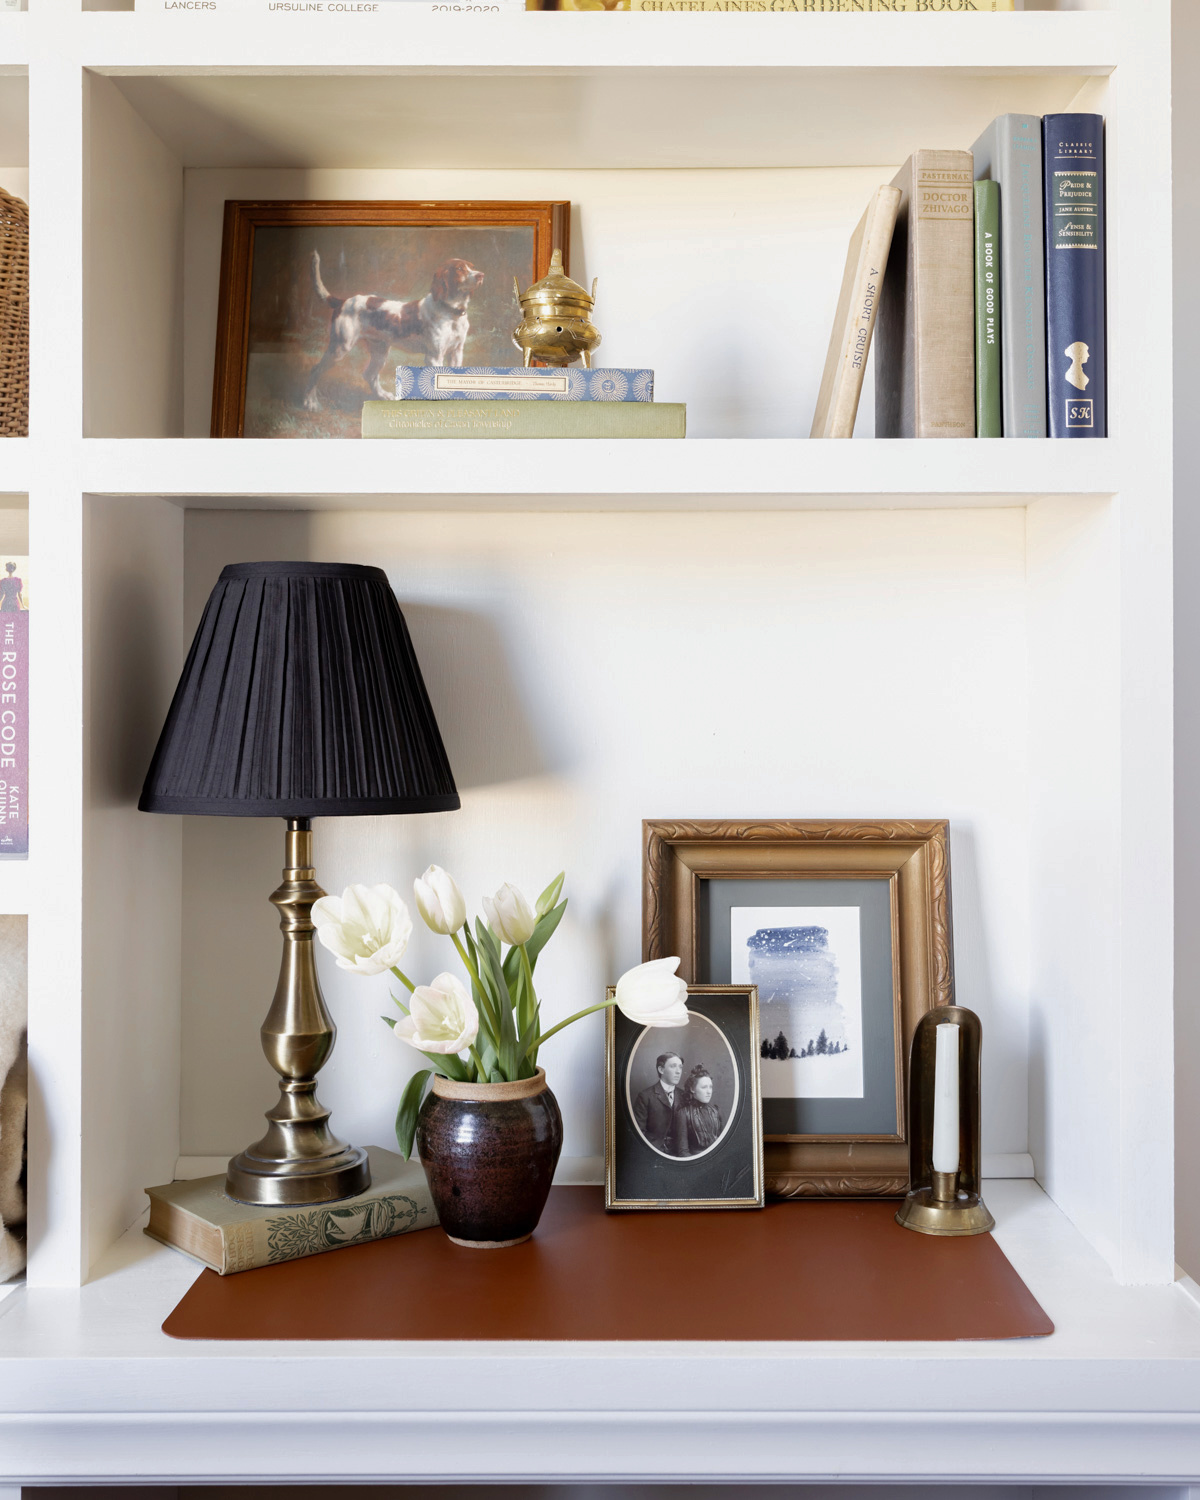 Extending the bookshelf wealth look to other areas of your space.